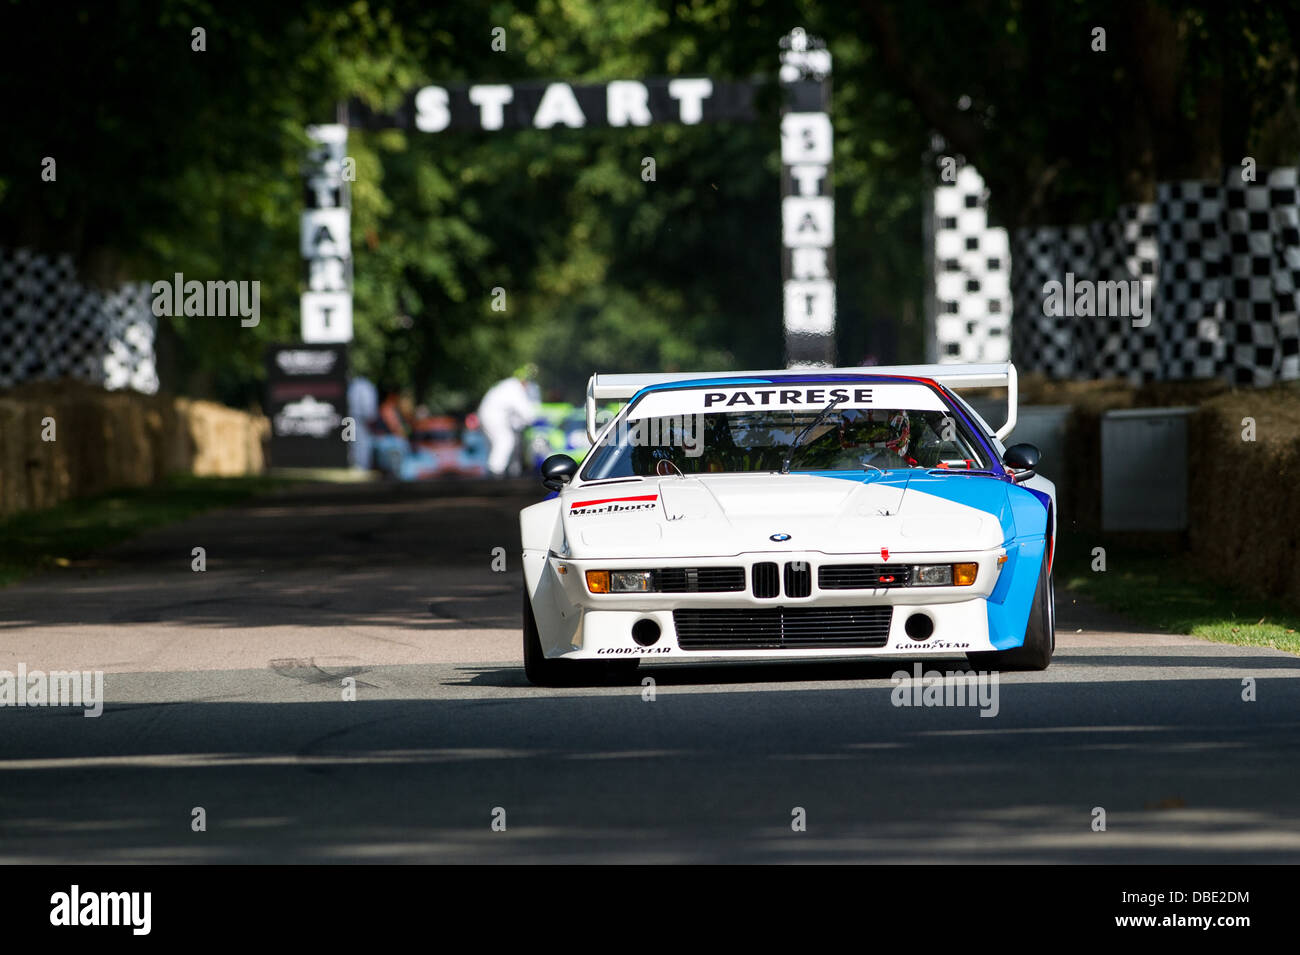 Chichester, UK - July 2013: BMW M1 Procar in action at the Goodwood Festival of Speed on July 12, 2013. Stock Photo